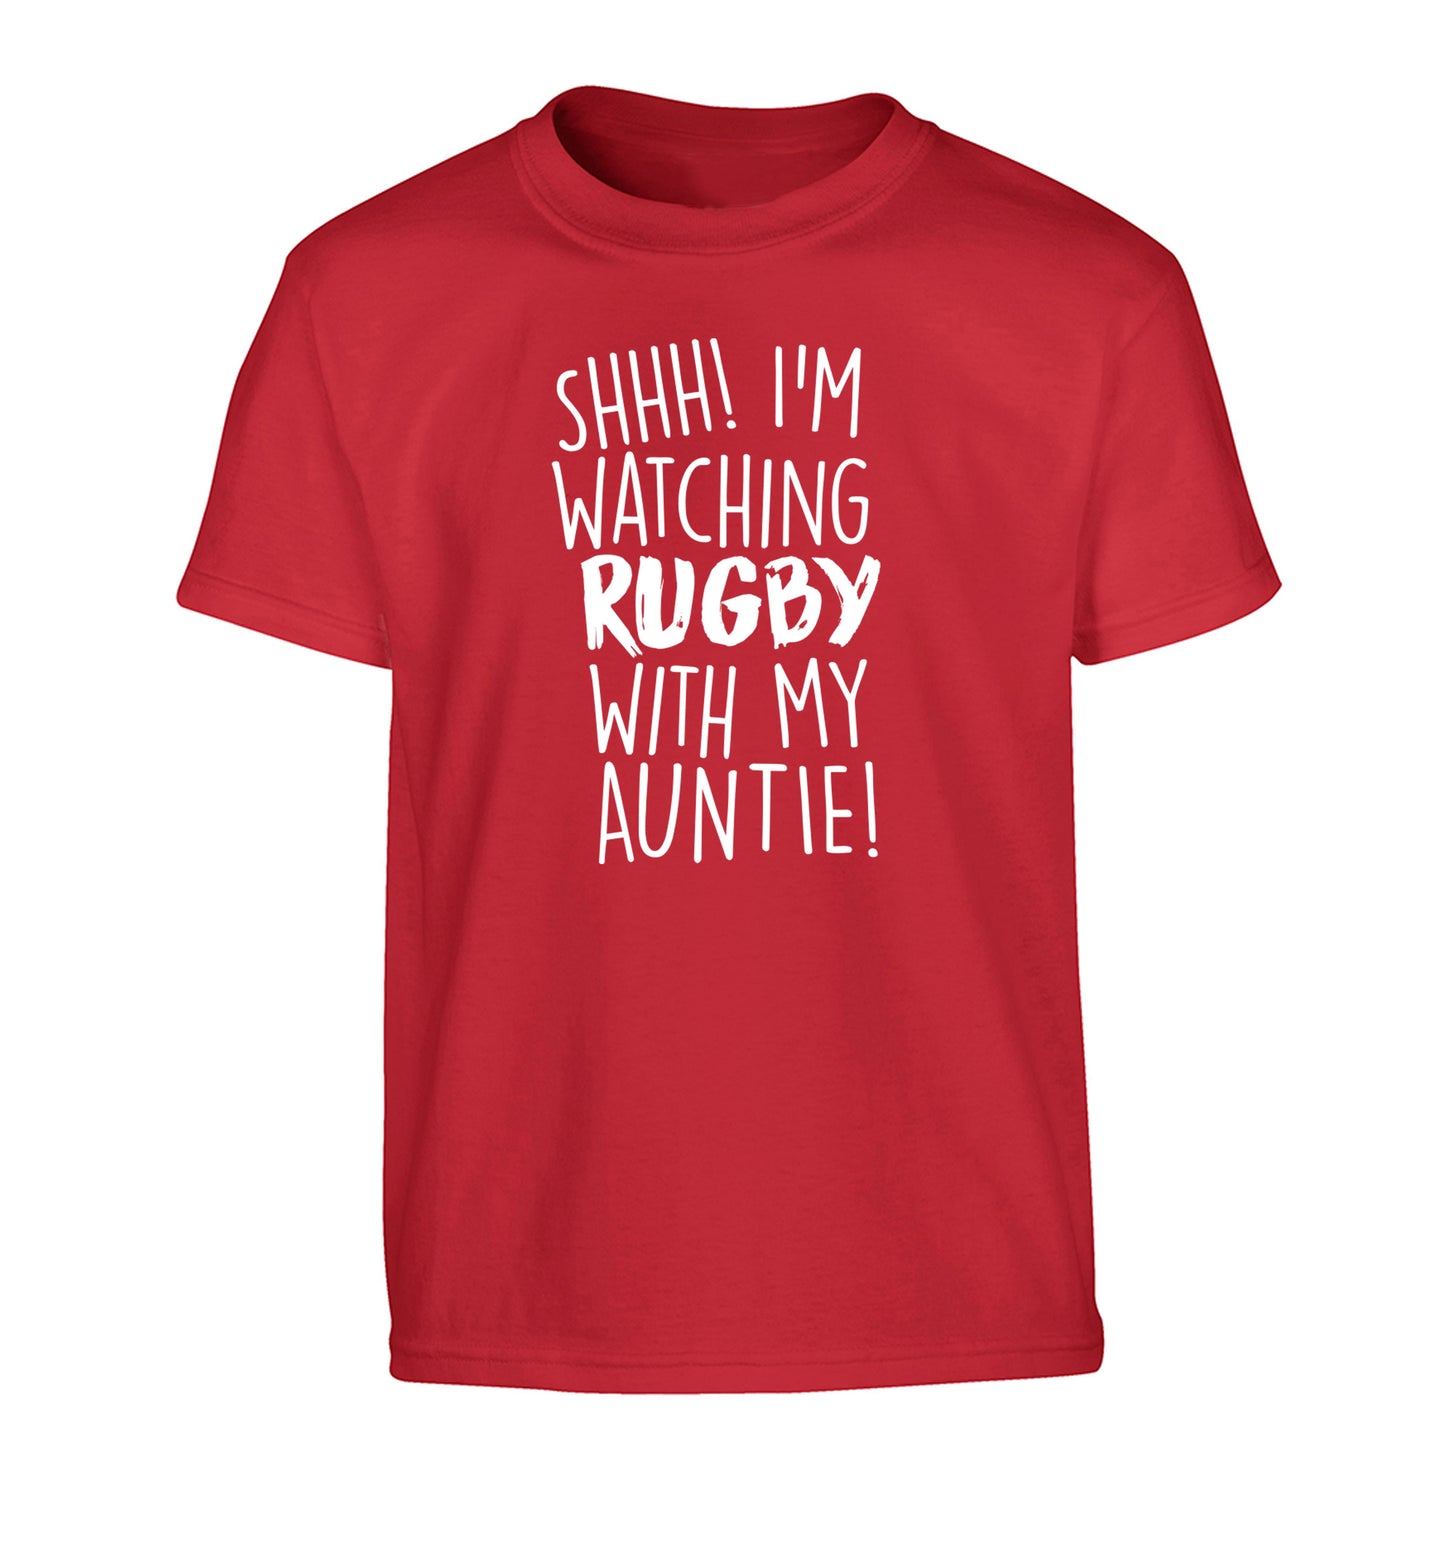 Shhh I'm watchin rugby with my auntie Children's red Tshirt 12-13 Years